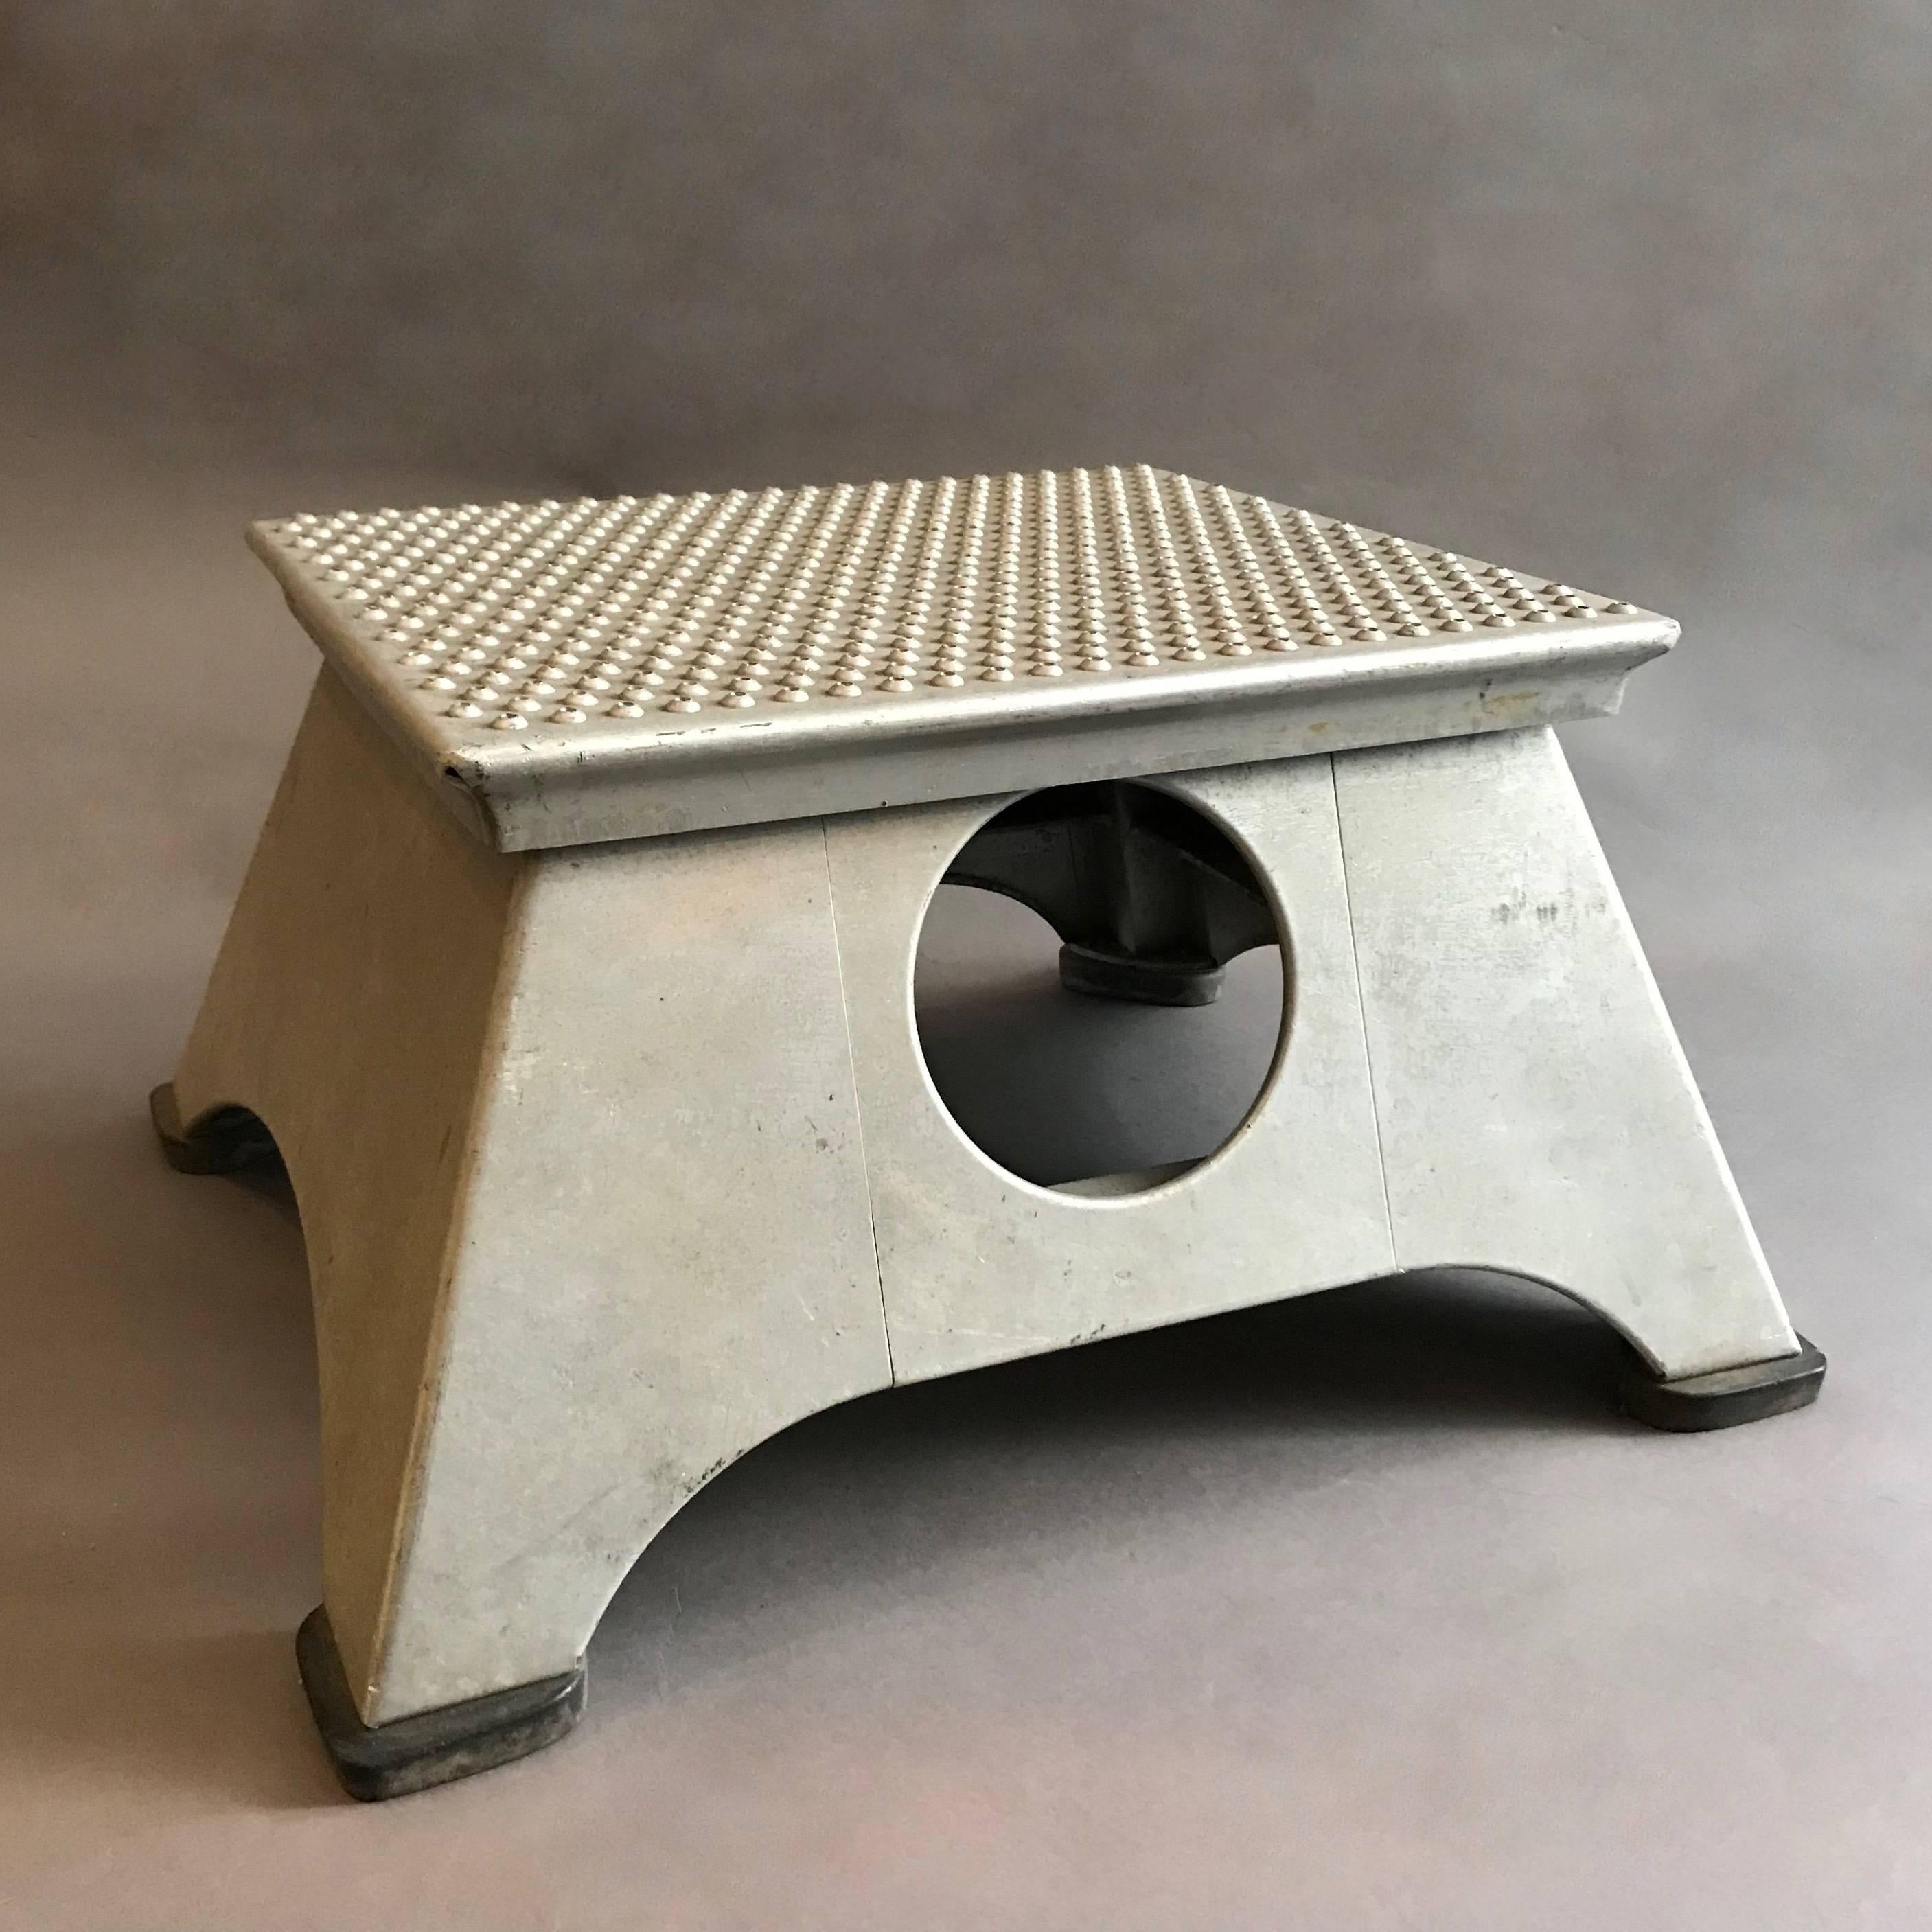 Industrial, mid-20th century, aluminum, train conductor, step stool features open handles on two sides and a perforated slip grip top. Measure: The top tapers to 13 inches x 16 inches.